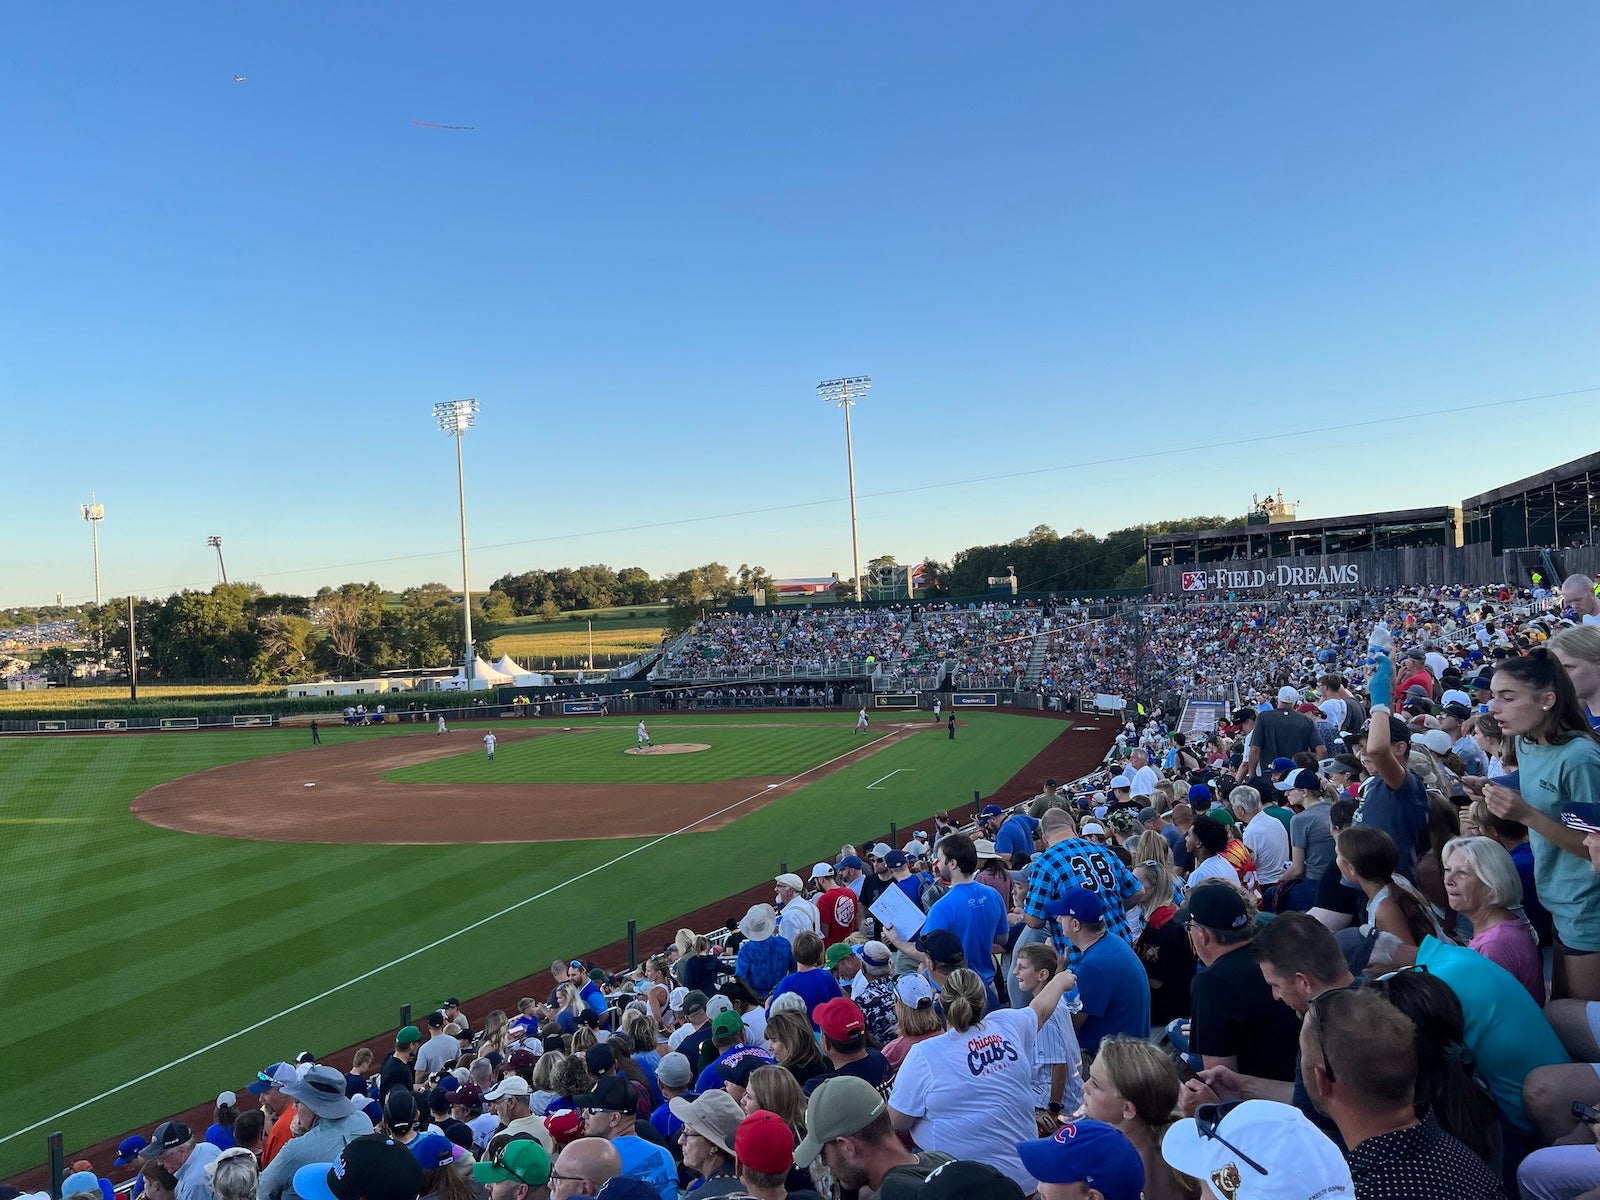 Inside the minor league baseball game at the Field of Dreams stadium